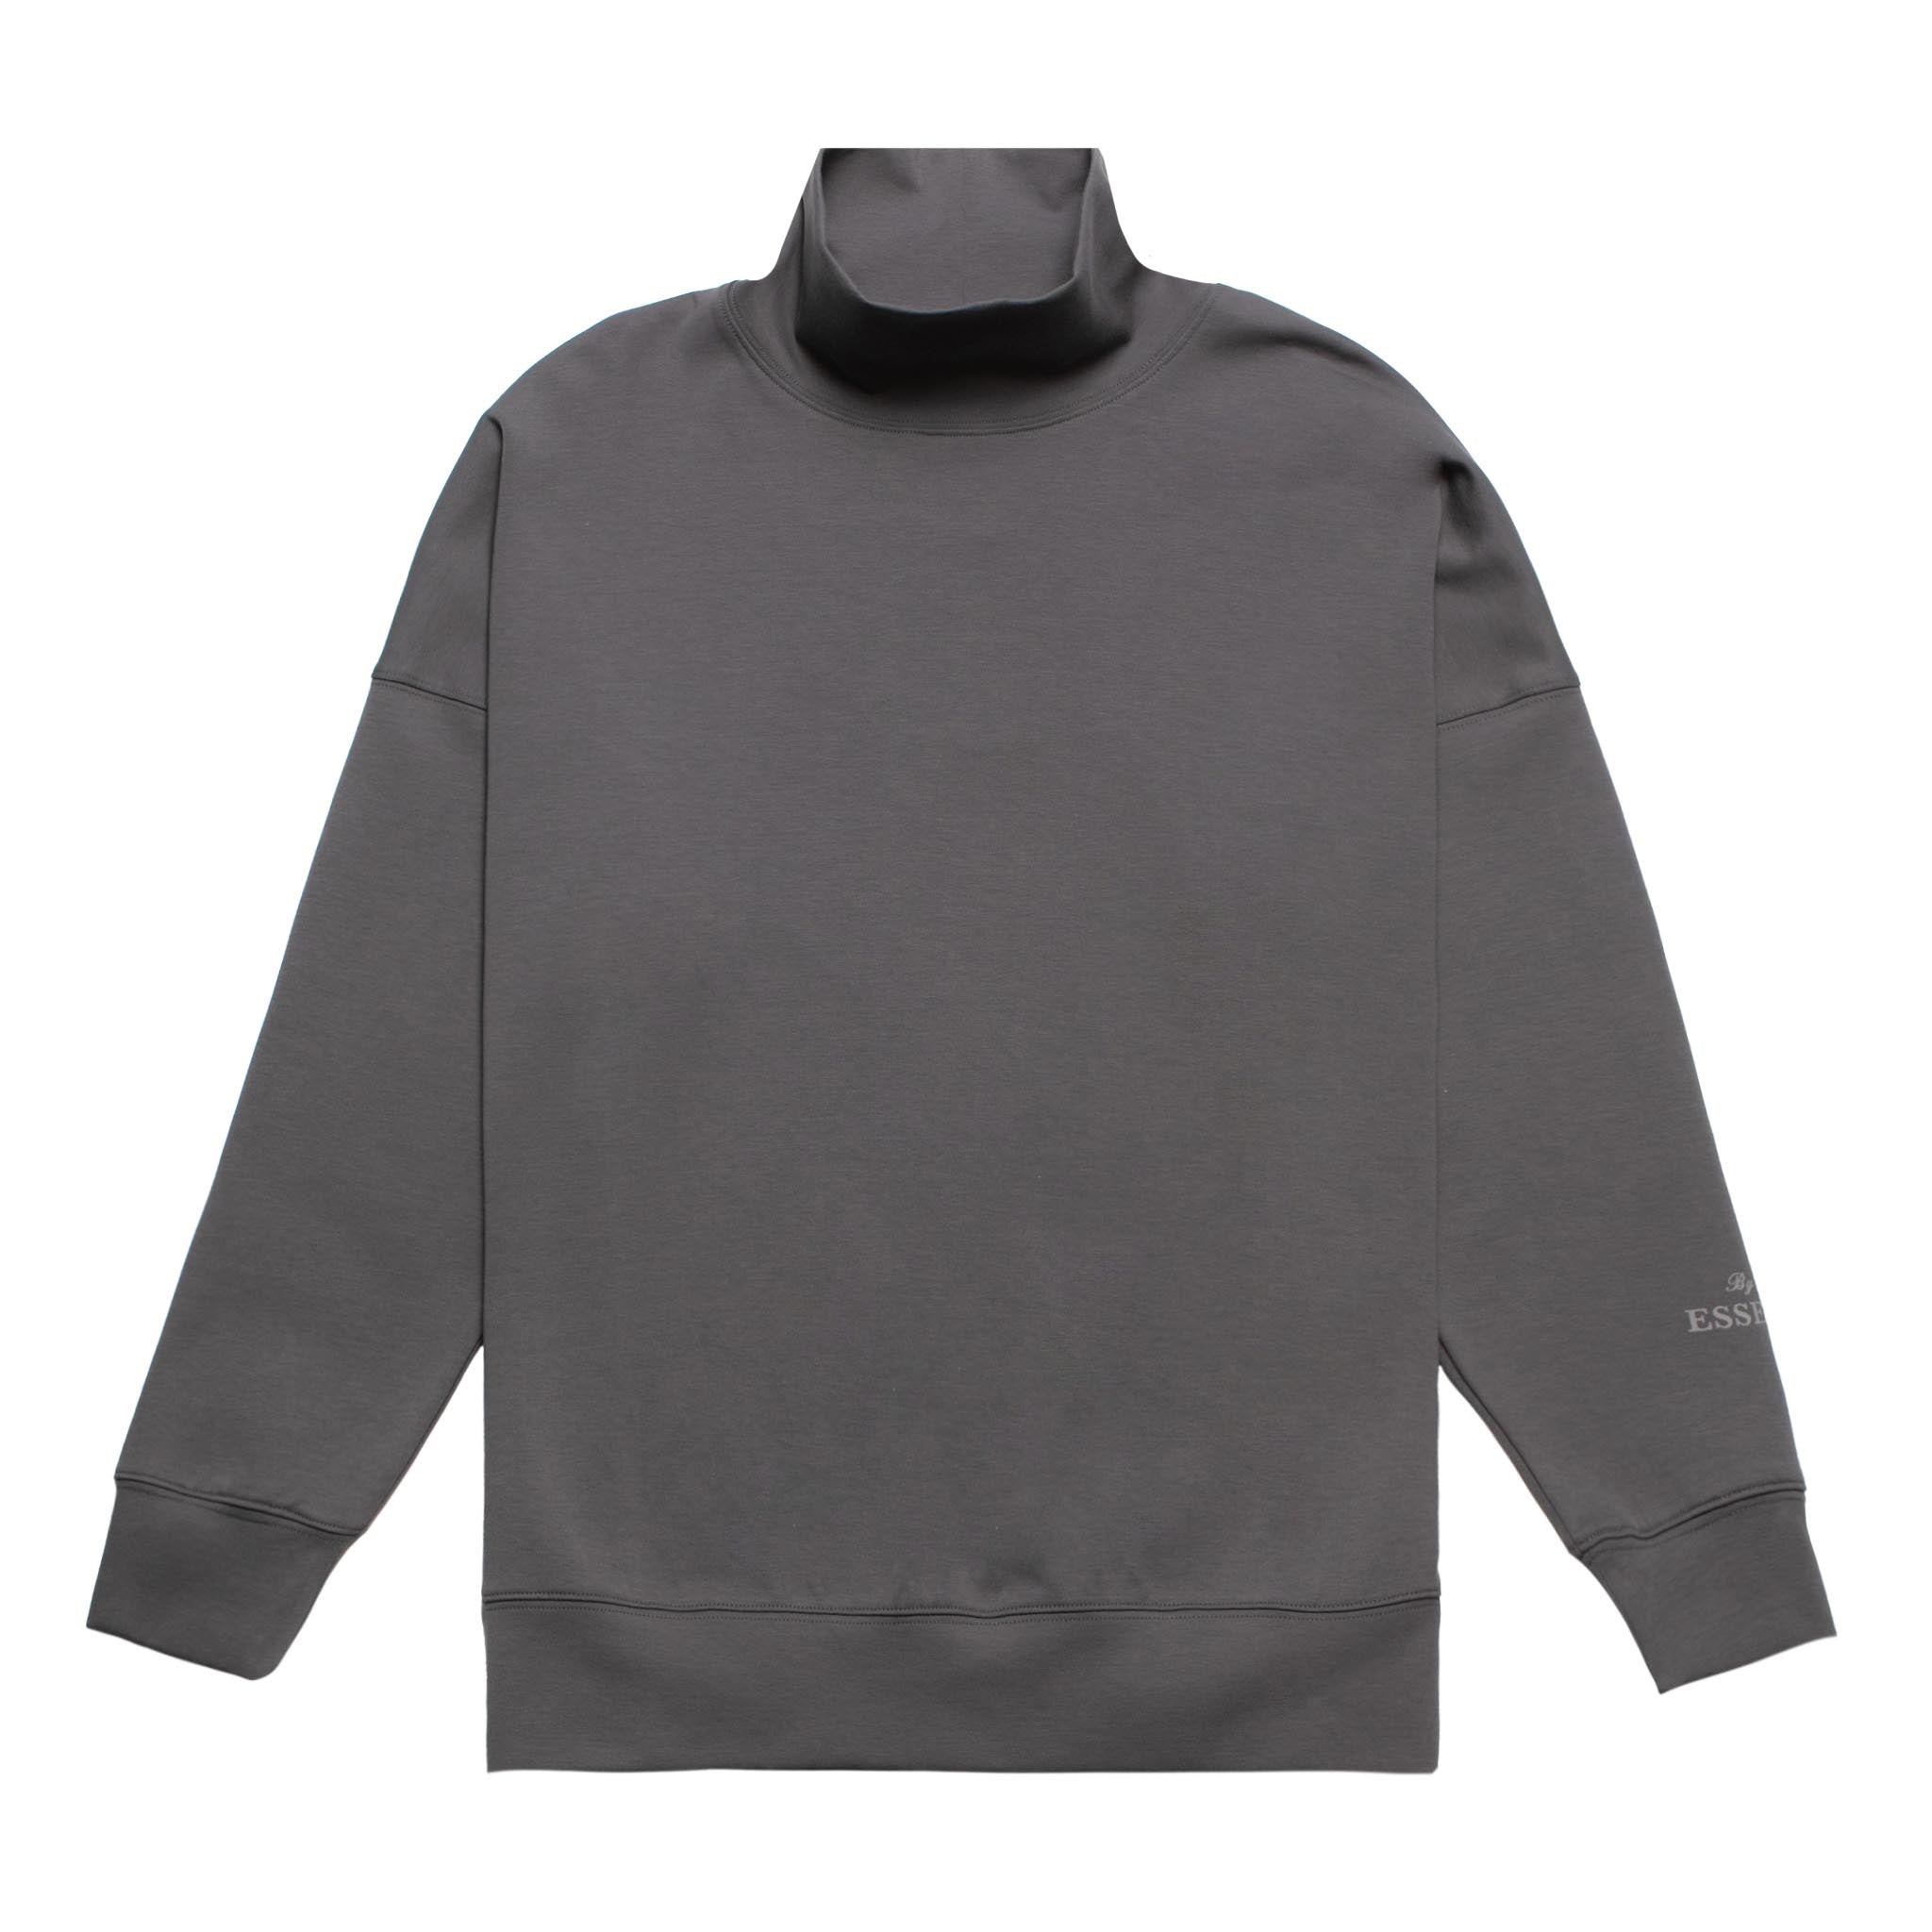 HOMME+ 'ESSENTIAL' By Homme Mockneck Charcoal